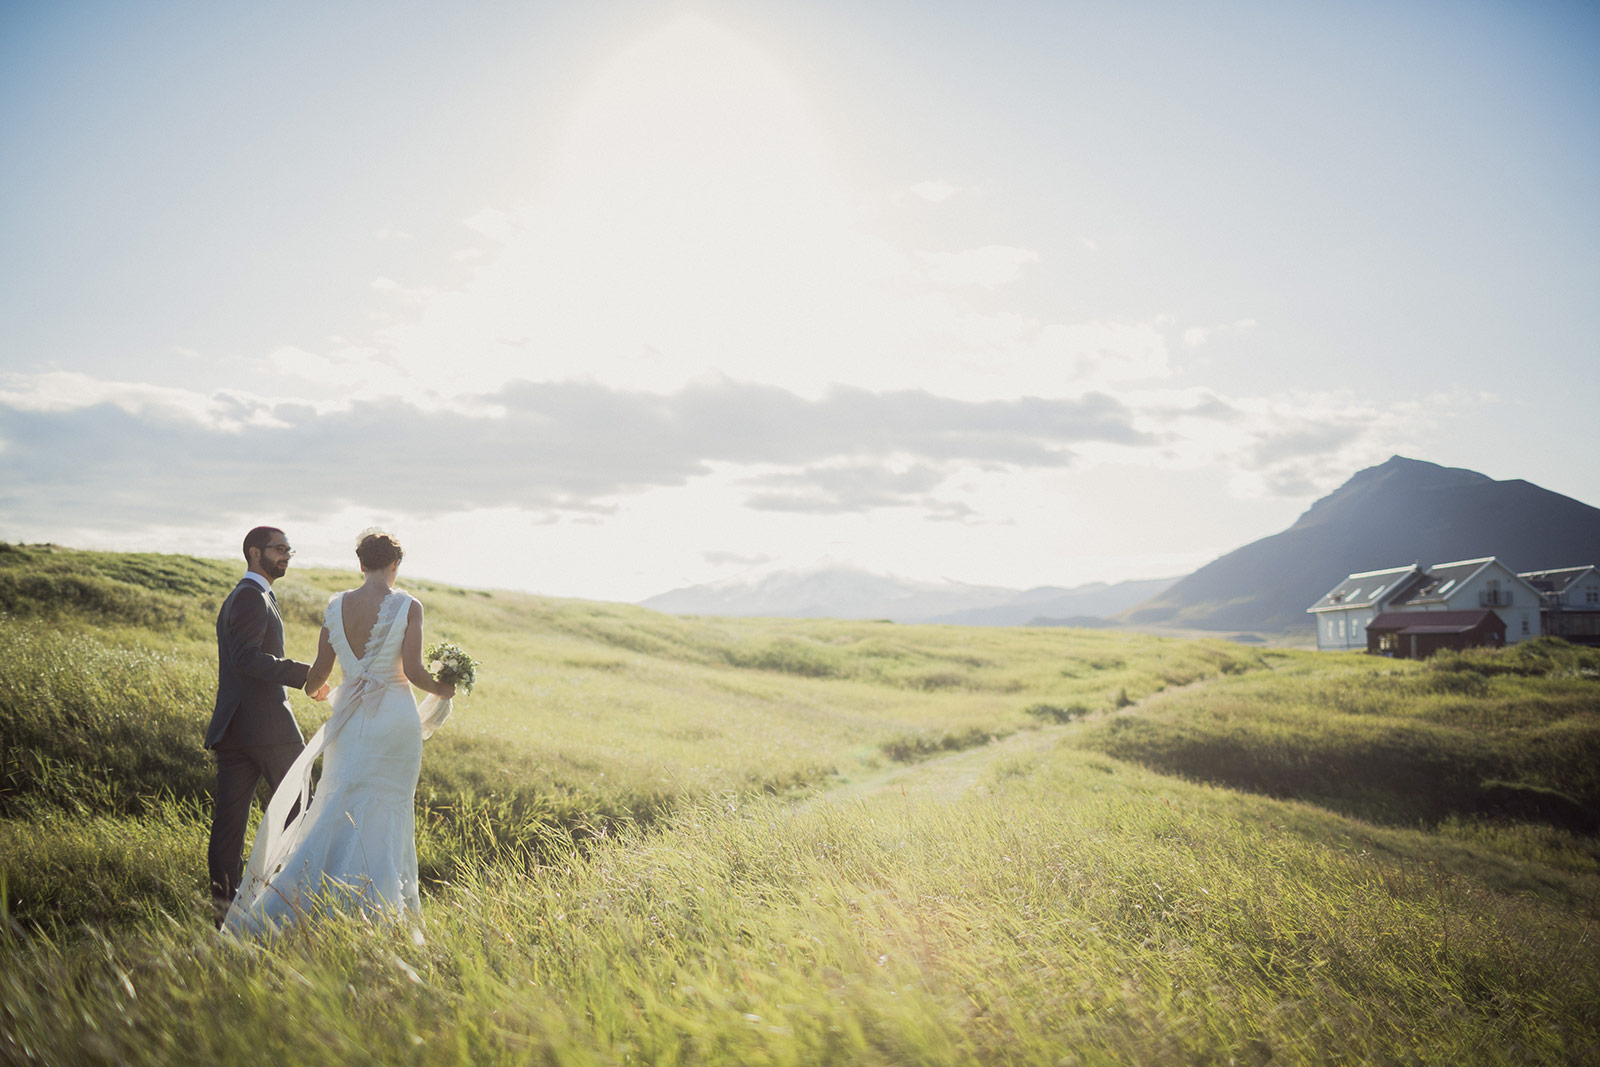 A bride and groom walking through the grass.